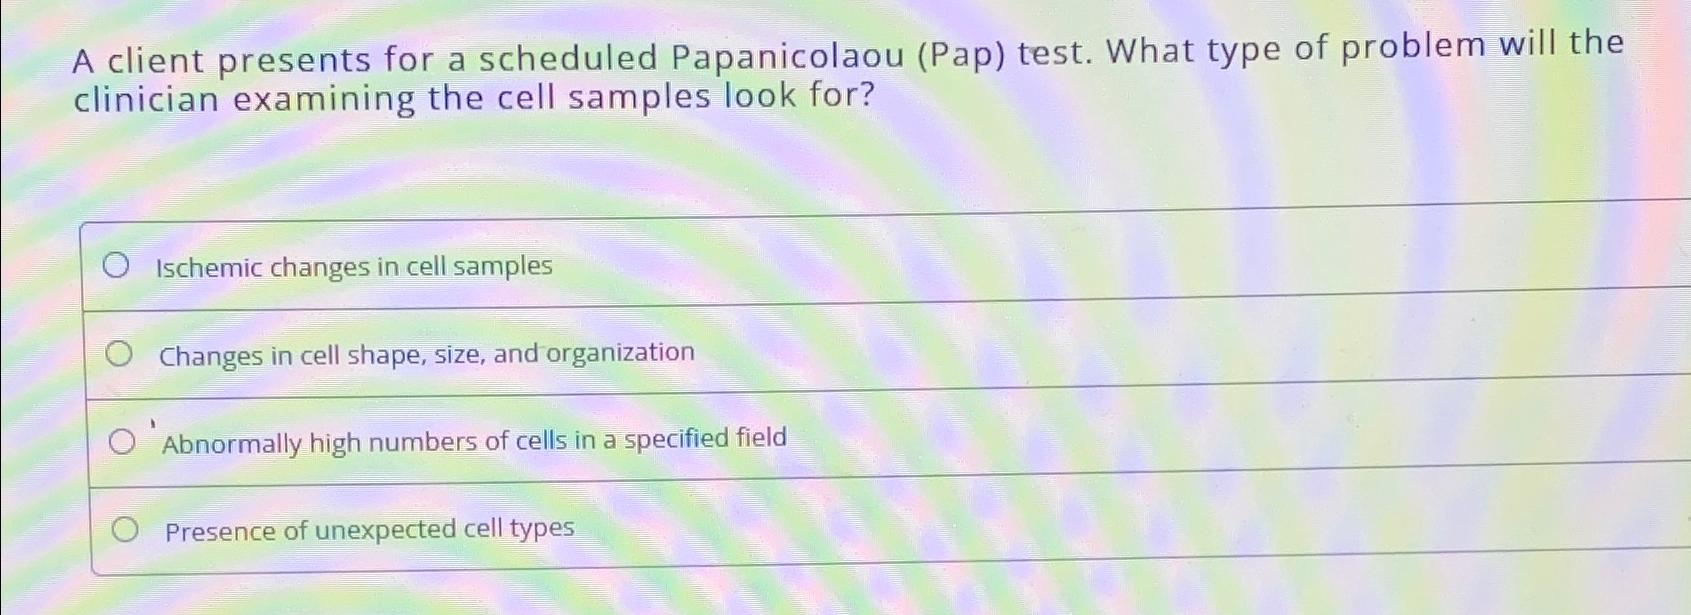 A client presents for a scheduled Papanicolaou (Pap) test. What type of problem will the clinician examining